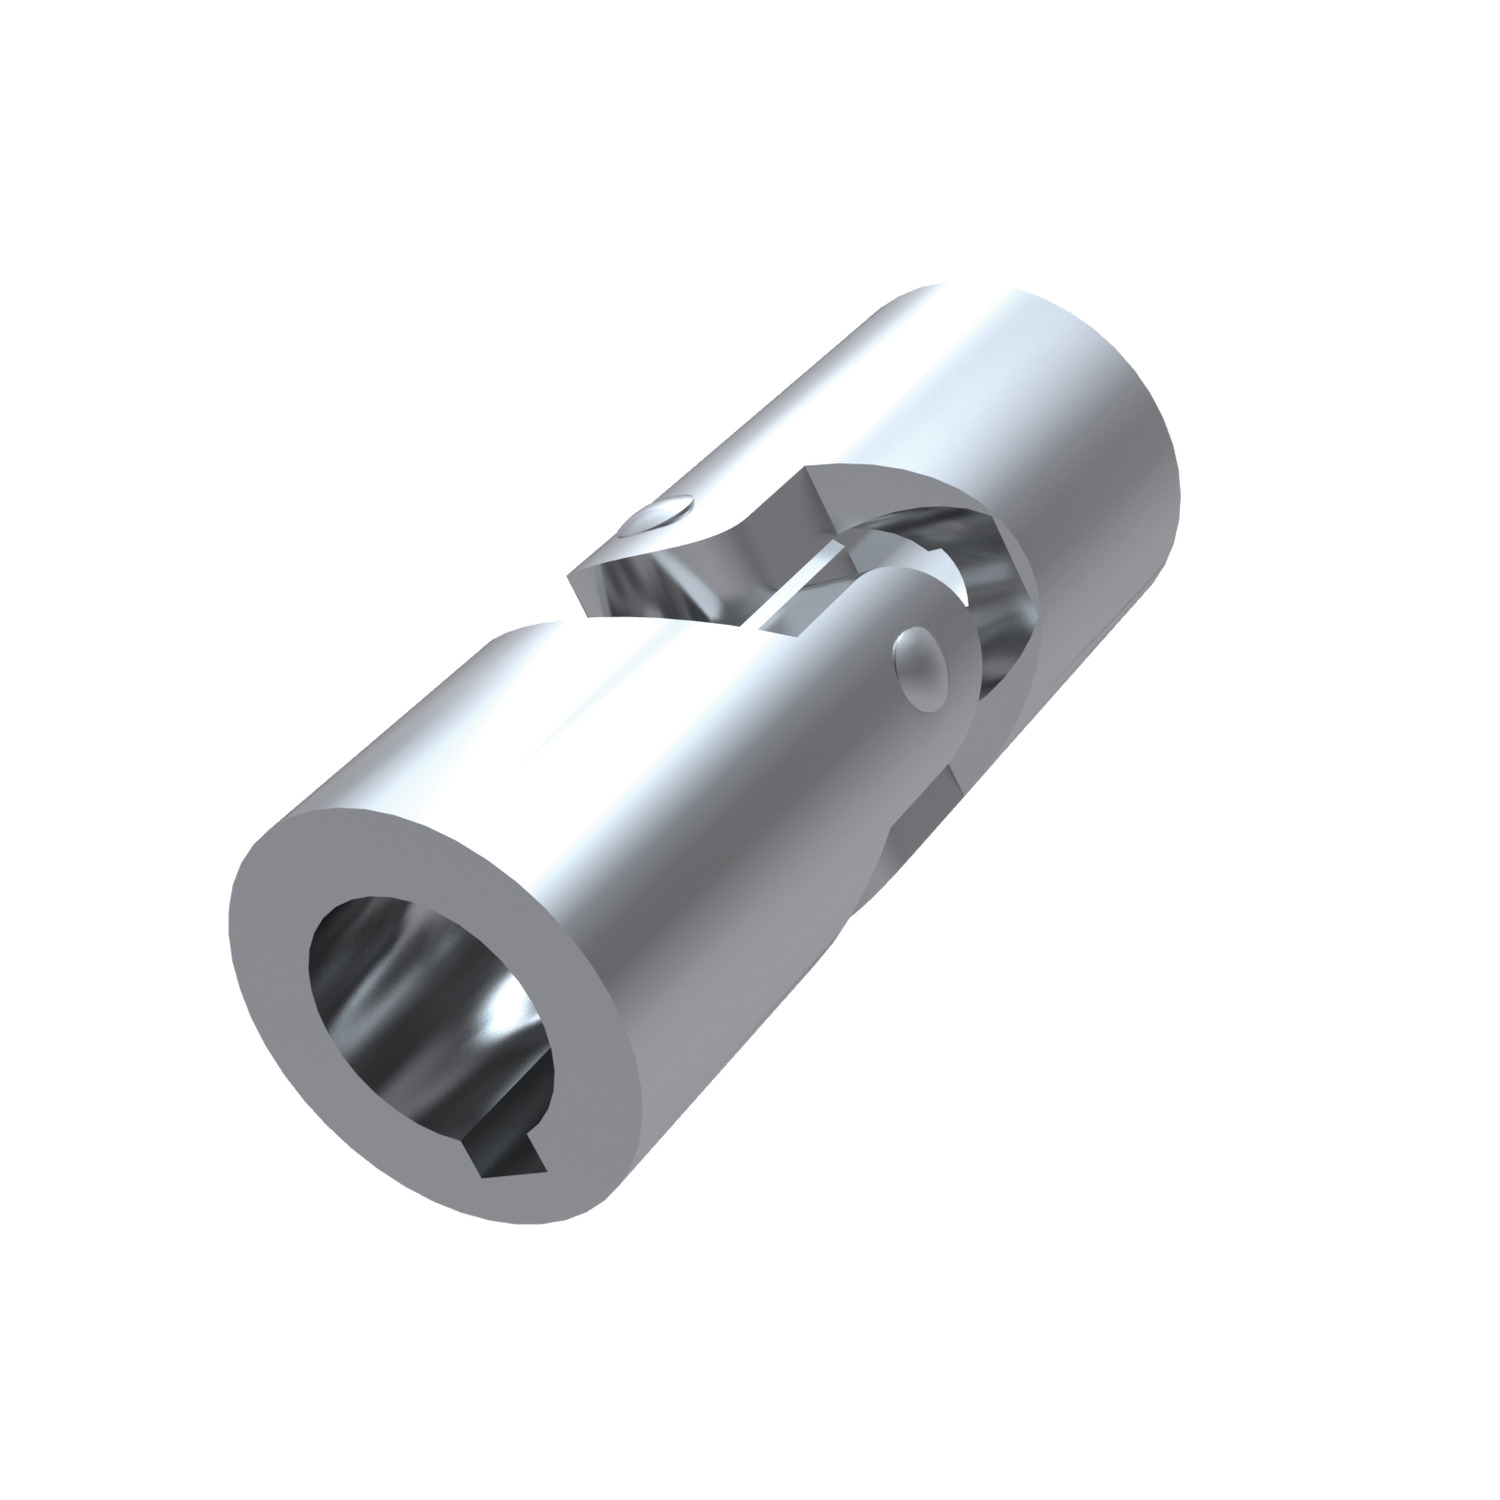 65170.W0030 Sgl Universal Joint - Free cutting St. Round Bore - 30 - 50 - 132